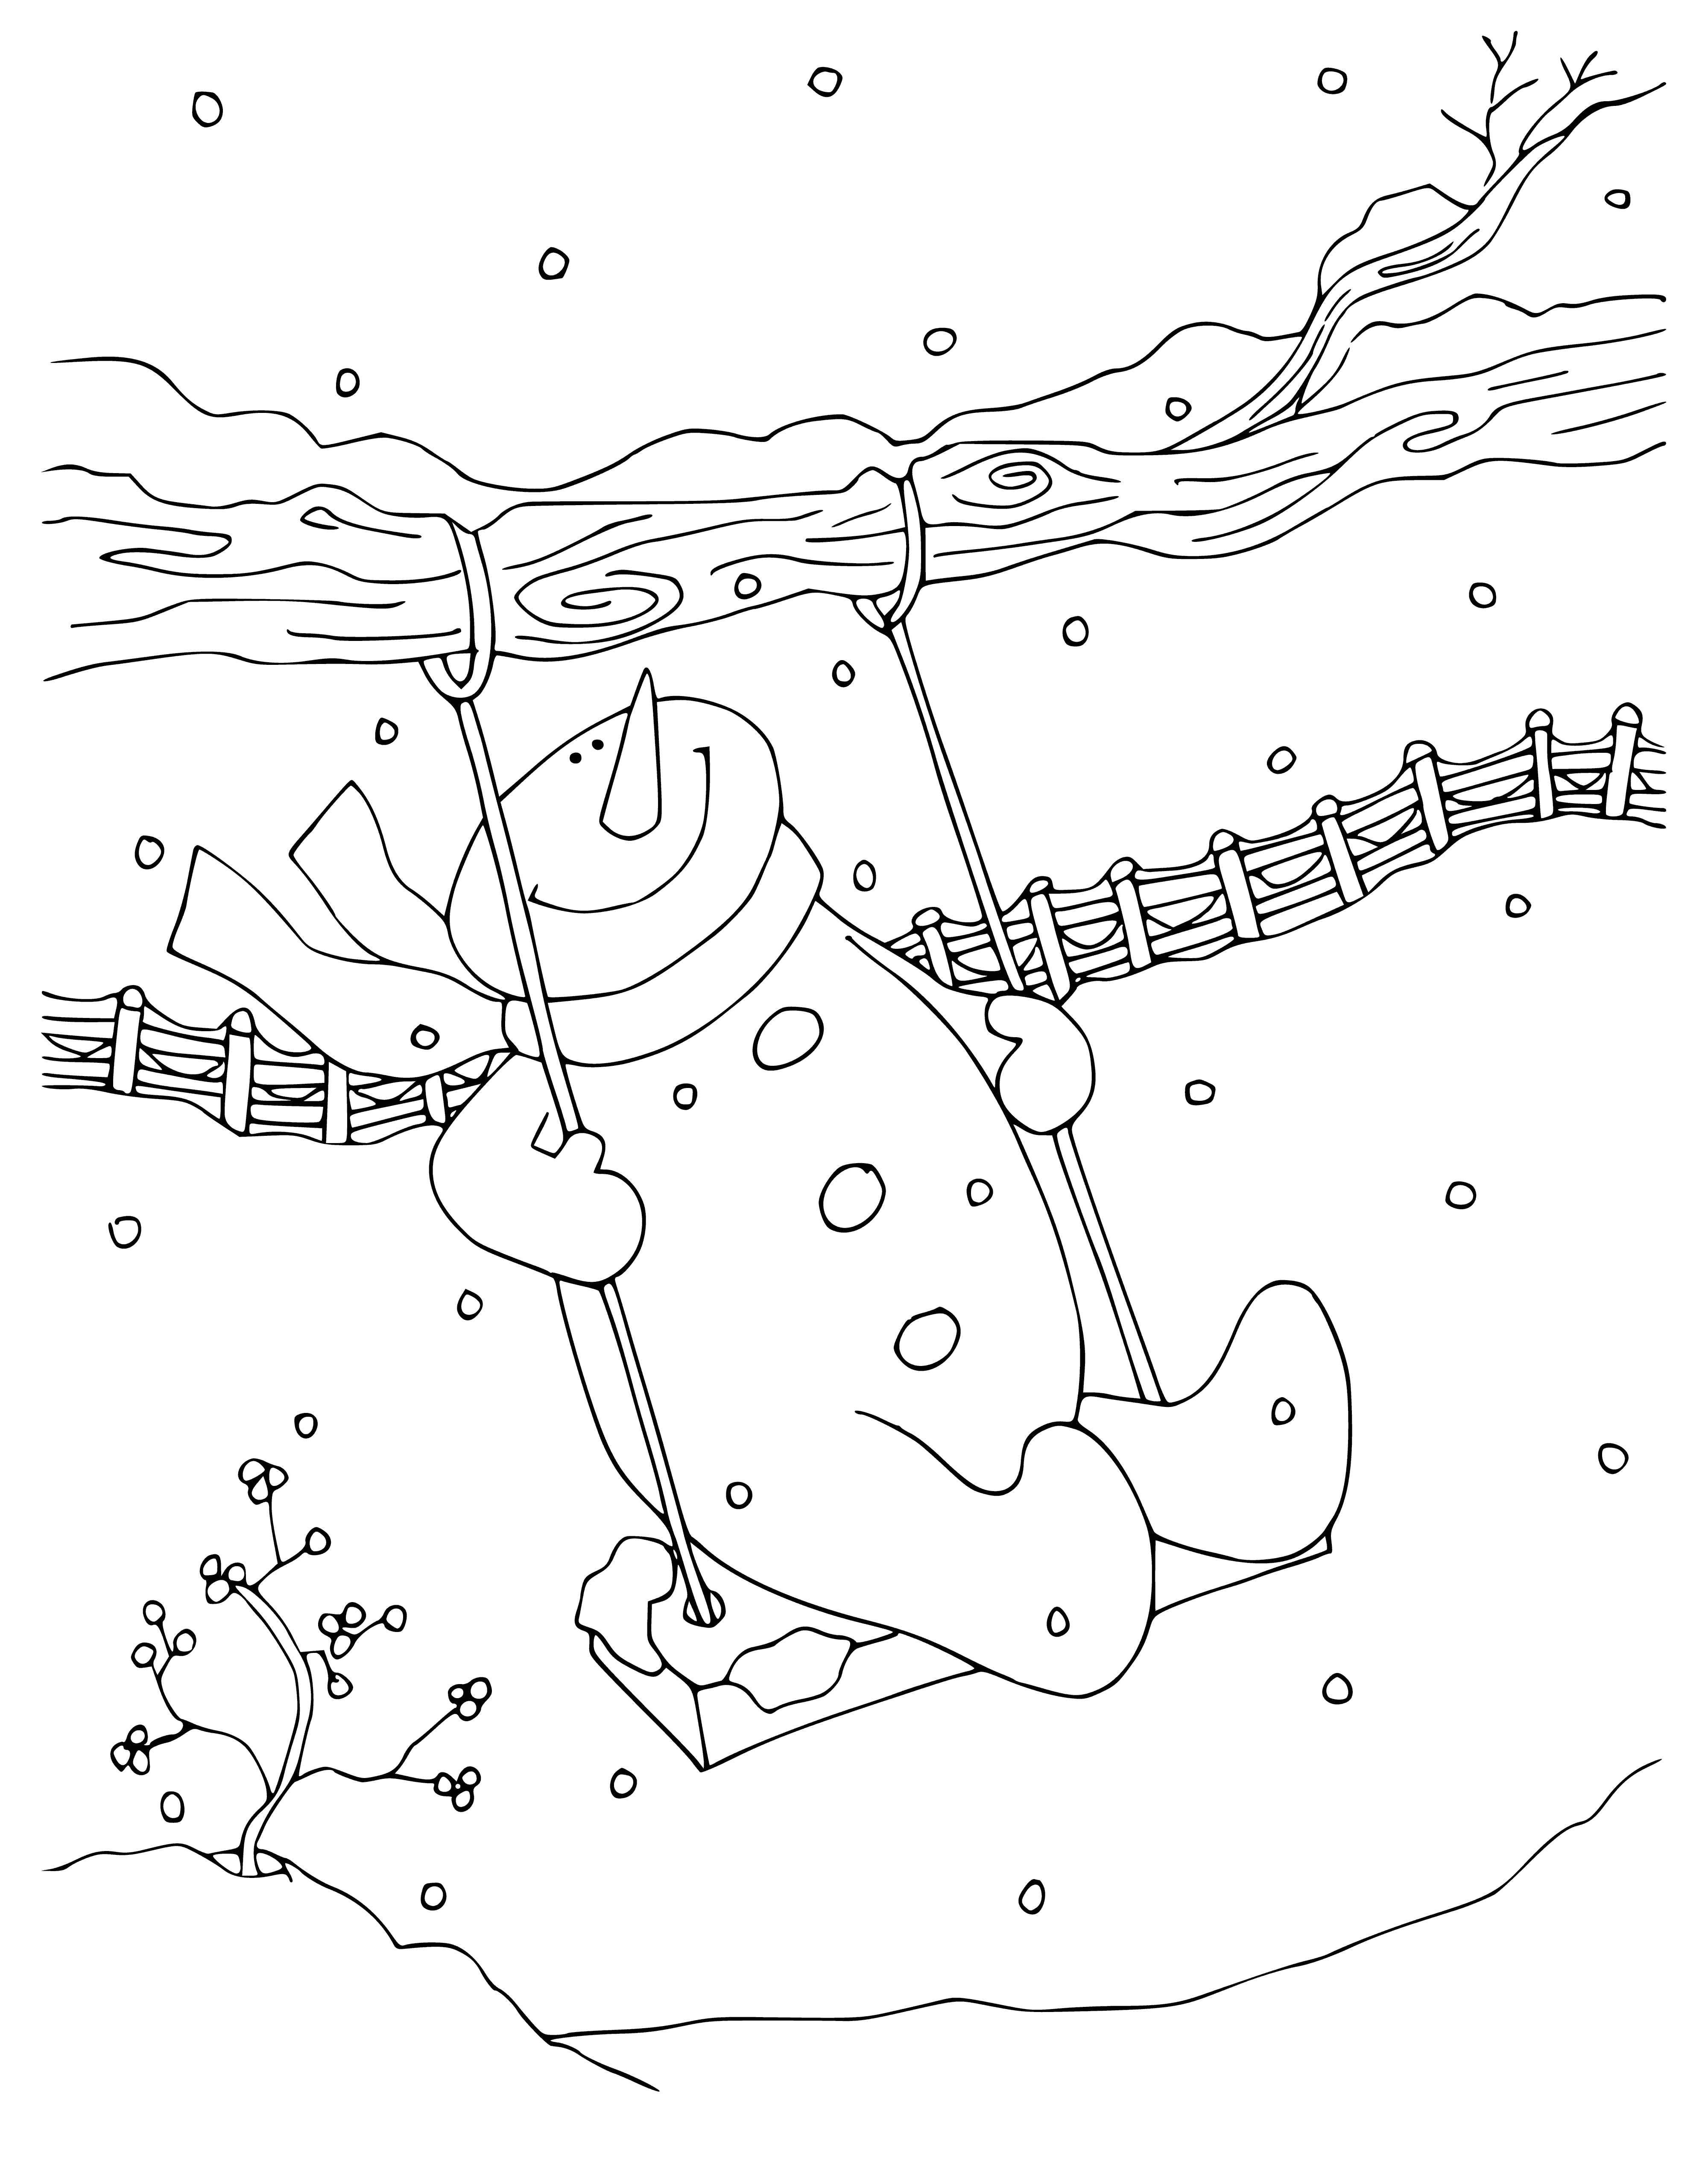 coloring page: Sitting on a swing, a happy snowman stretches its arms with a hat tilted sideways.